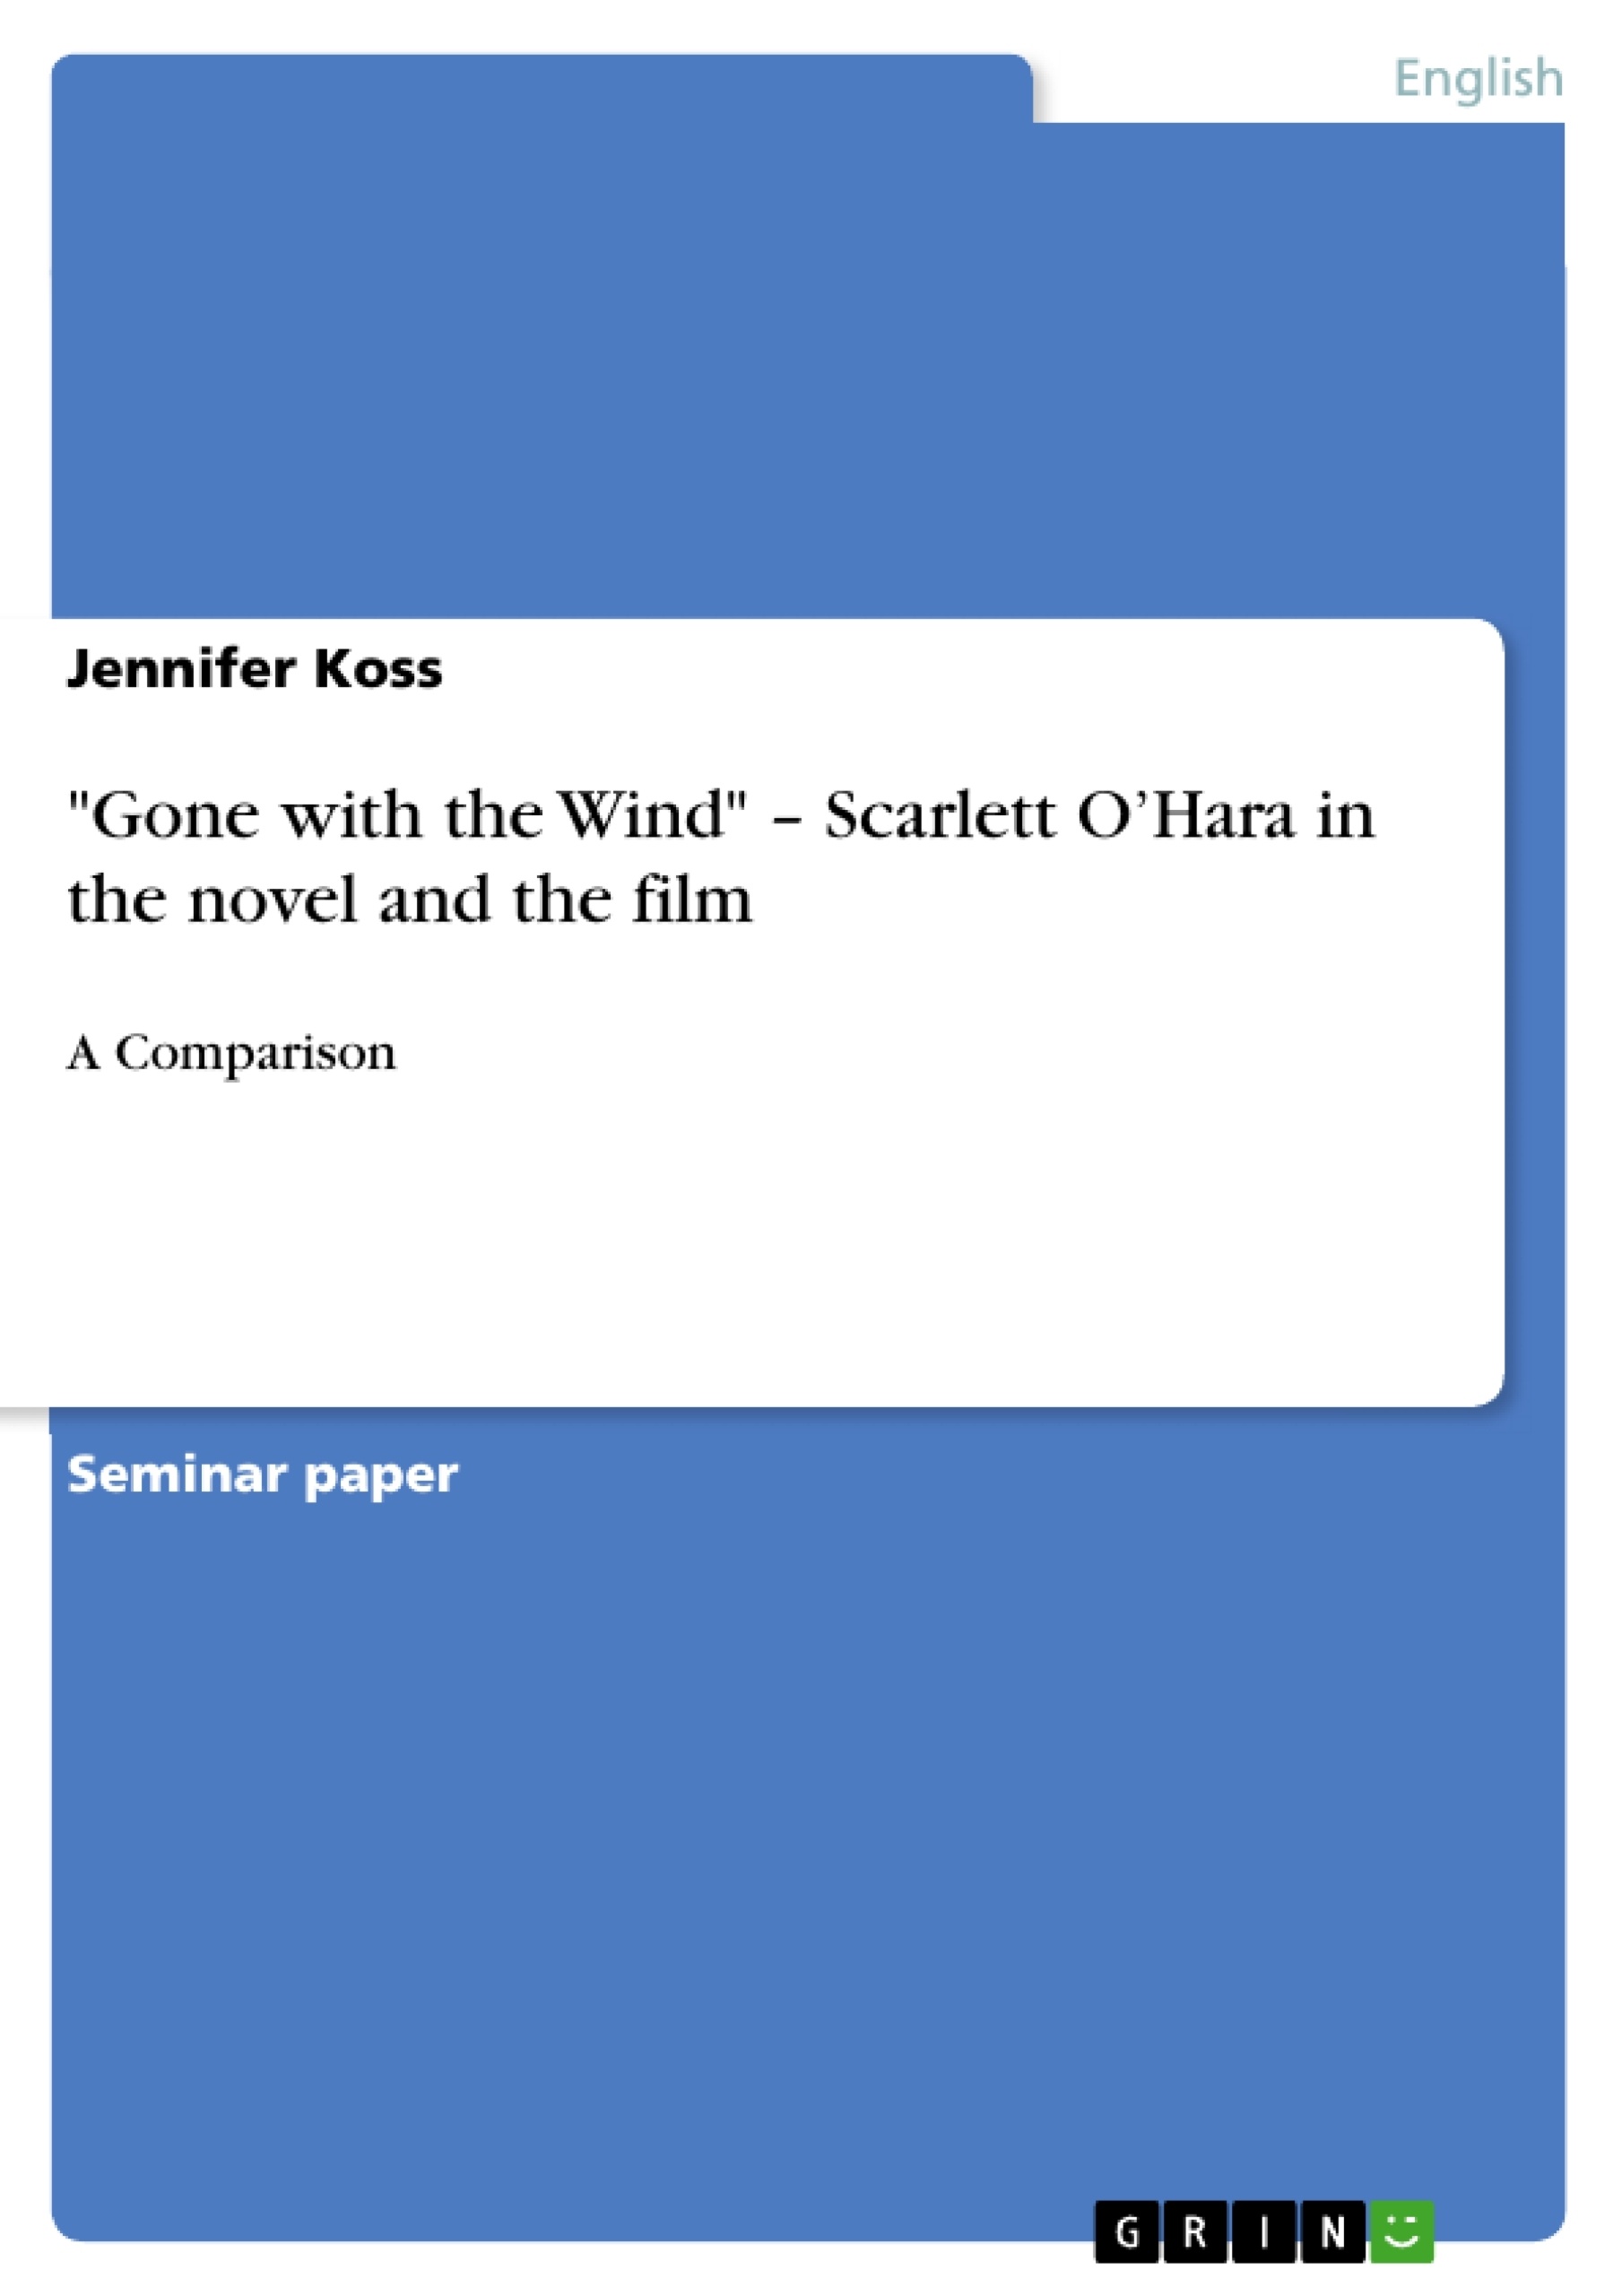 Titre: "Gone with the Wind" – Scarlett O’Hara in the novel and the film